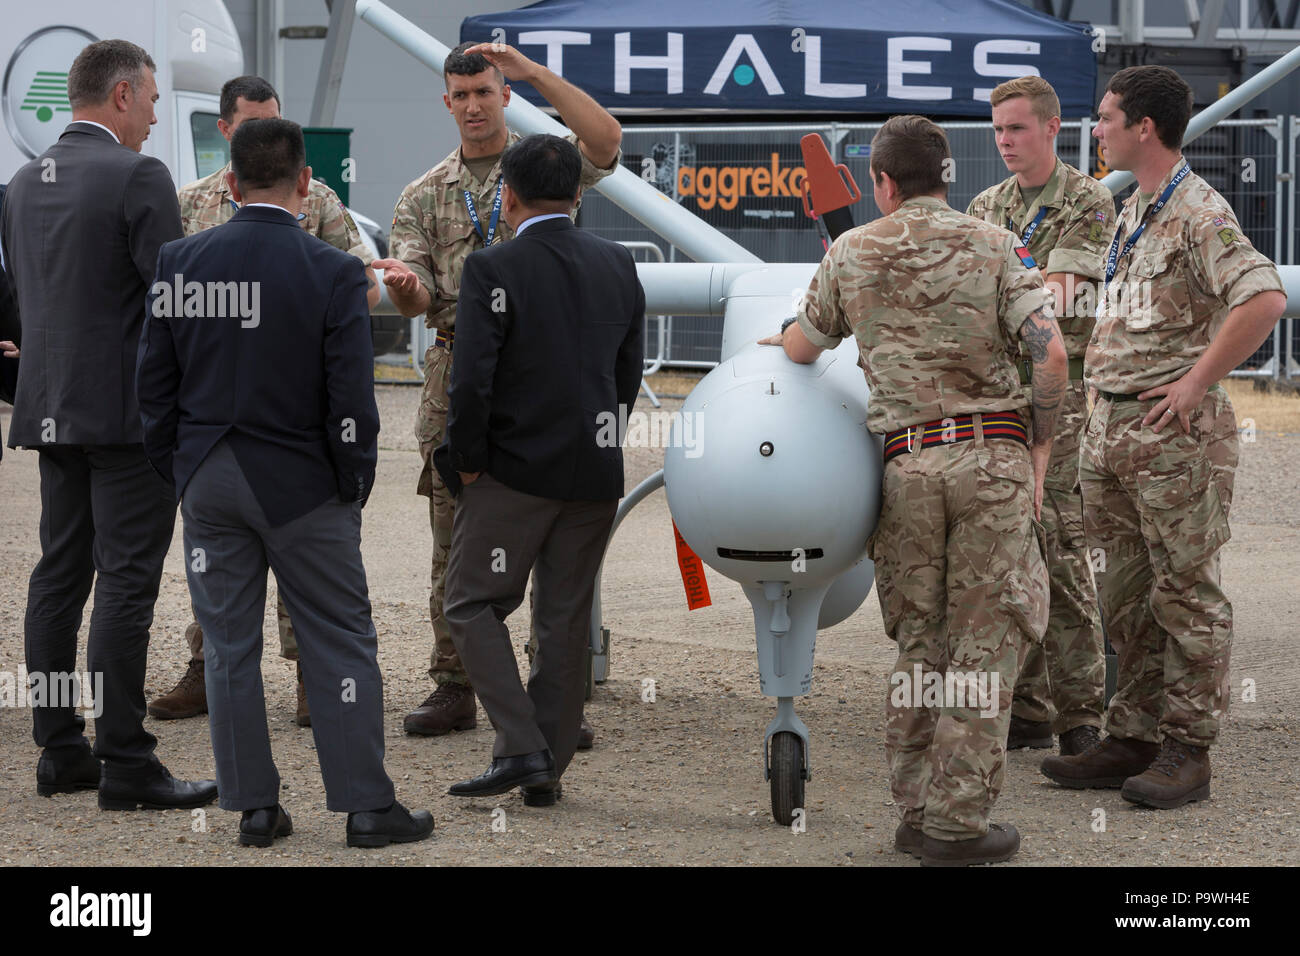 A foreign delegation listens to a briefing by a member of the British Army's Royal Artillery, demonstrating a Thales Watchkeeper UAV at the Farnborough Airshow, on 18th July 2018, in Farnborough, England. Stock Photo